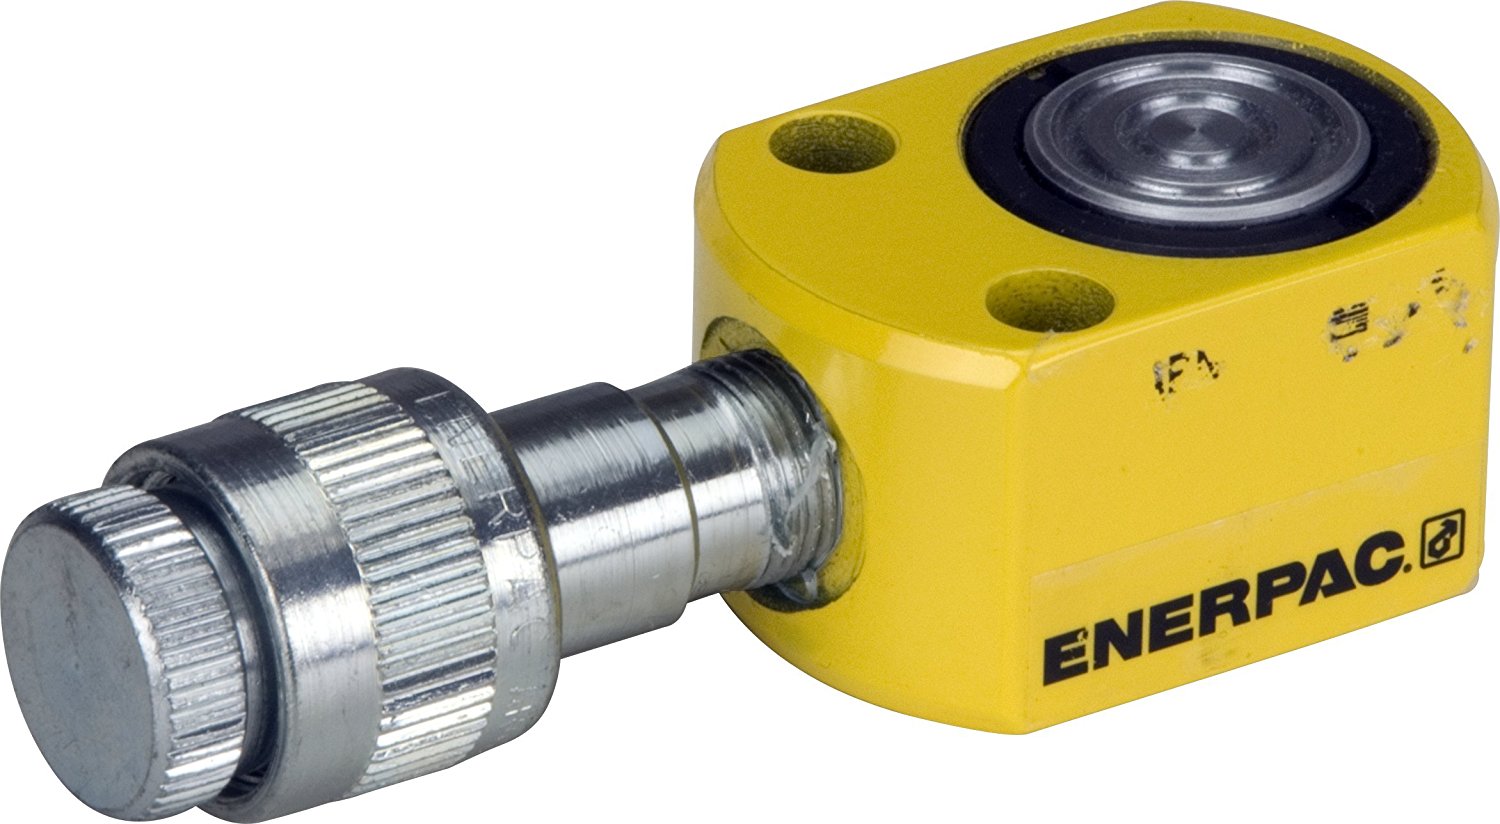 5 Helpful Tips for Purchasing the Right Enerpac Cylinders